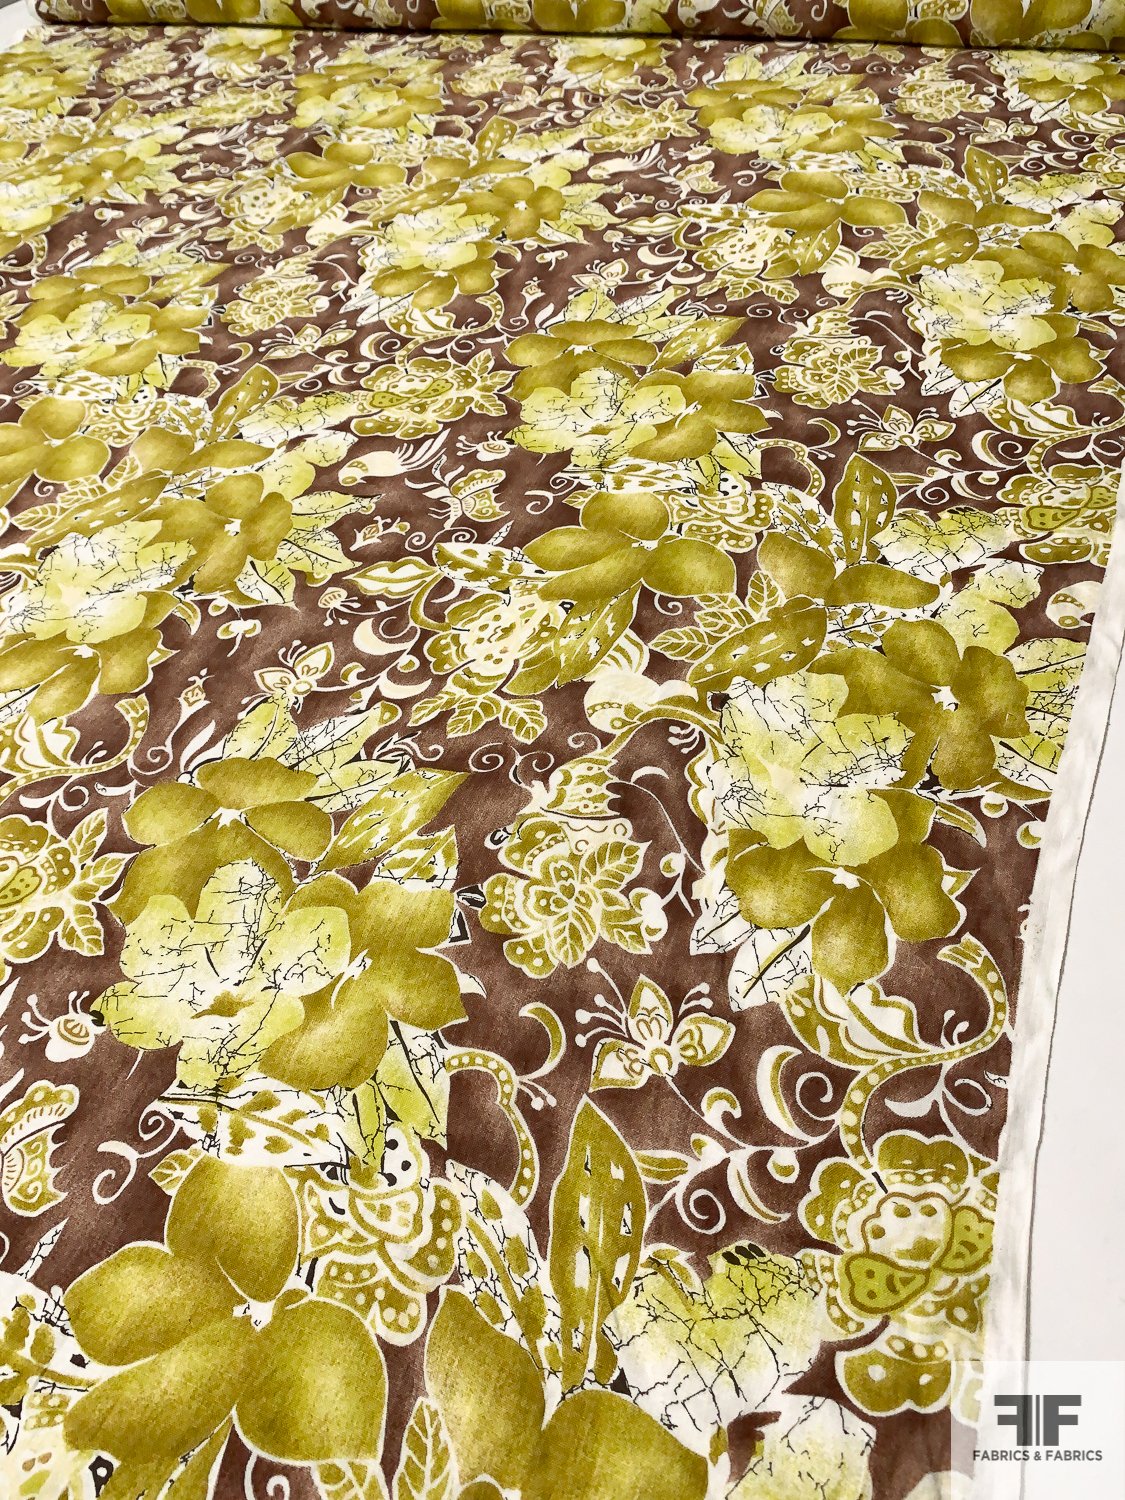 Floral Printed Linen - Chartreuse / Brown / Off-White